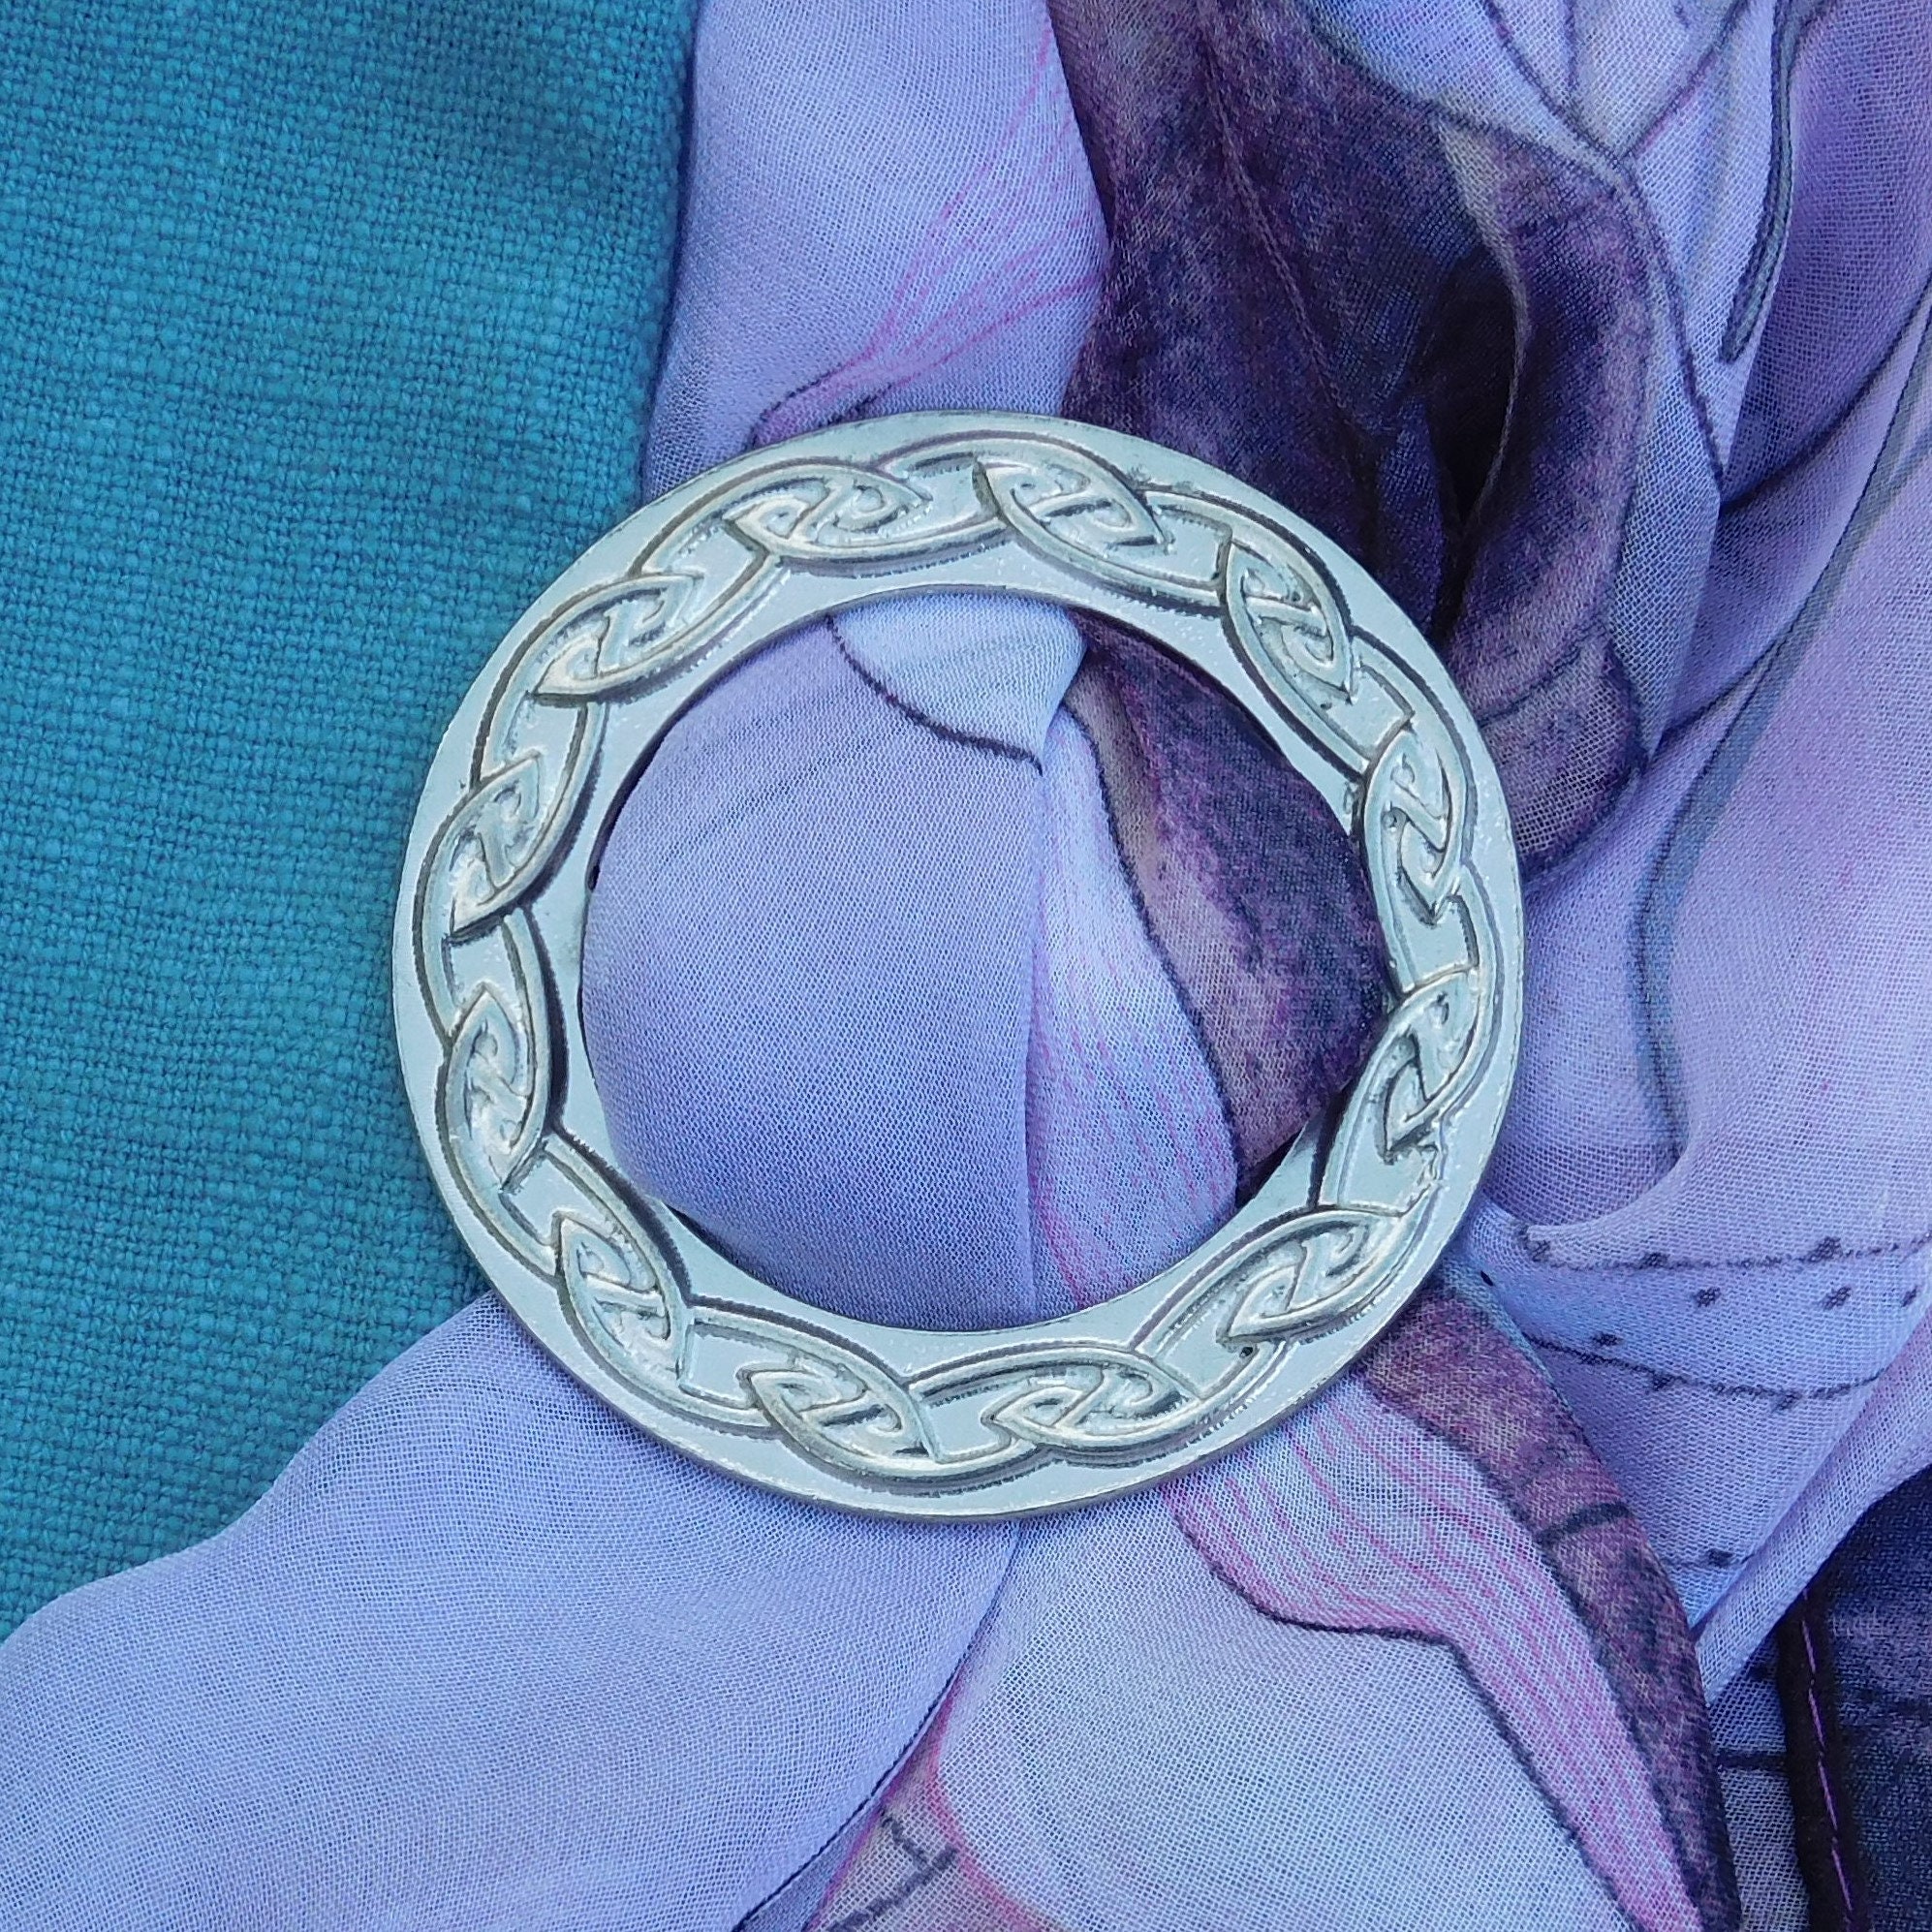 Celtic Scarf Ring, Deep Celtic Braid Scarf Ring, Handmade, in Fine Pewter,  by William Sturt